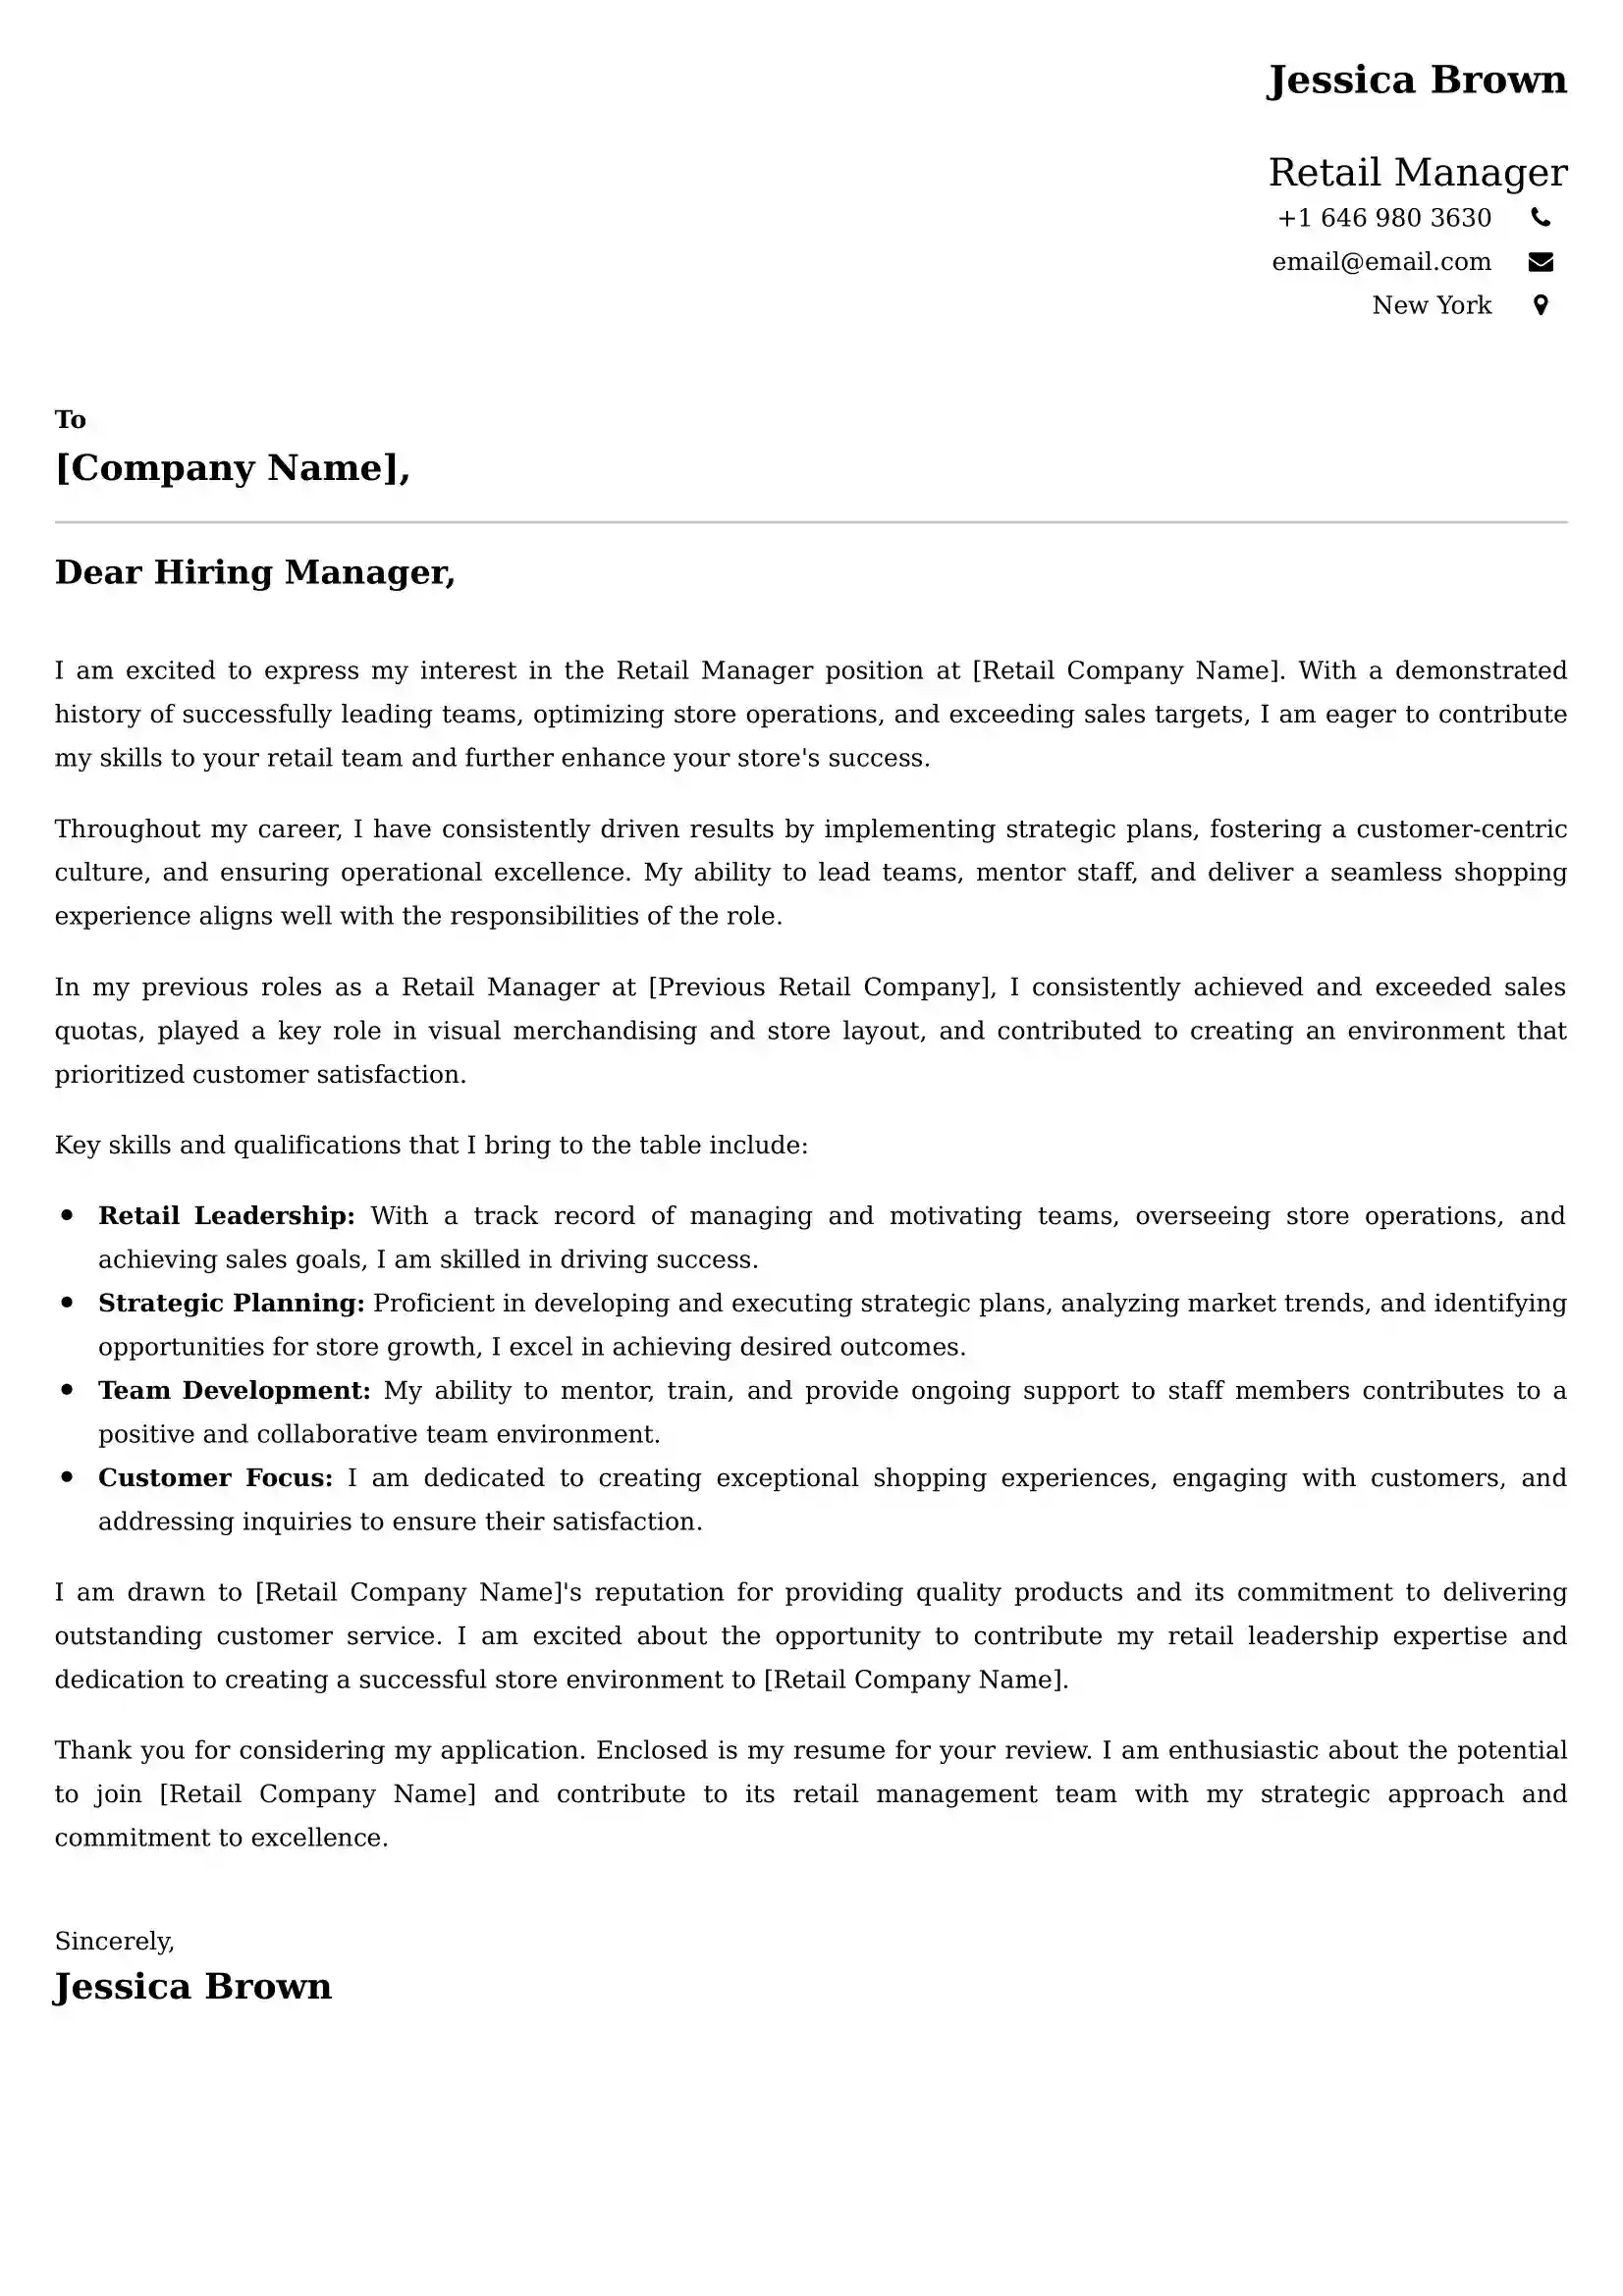 Retail Manager Cover Letter Examples India